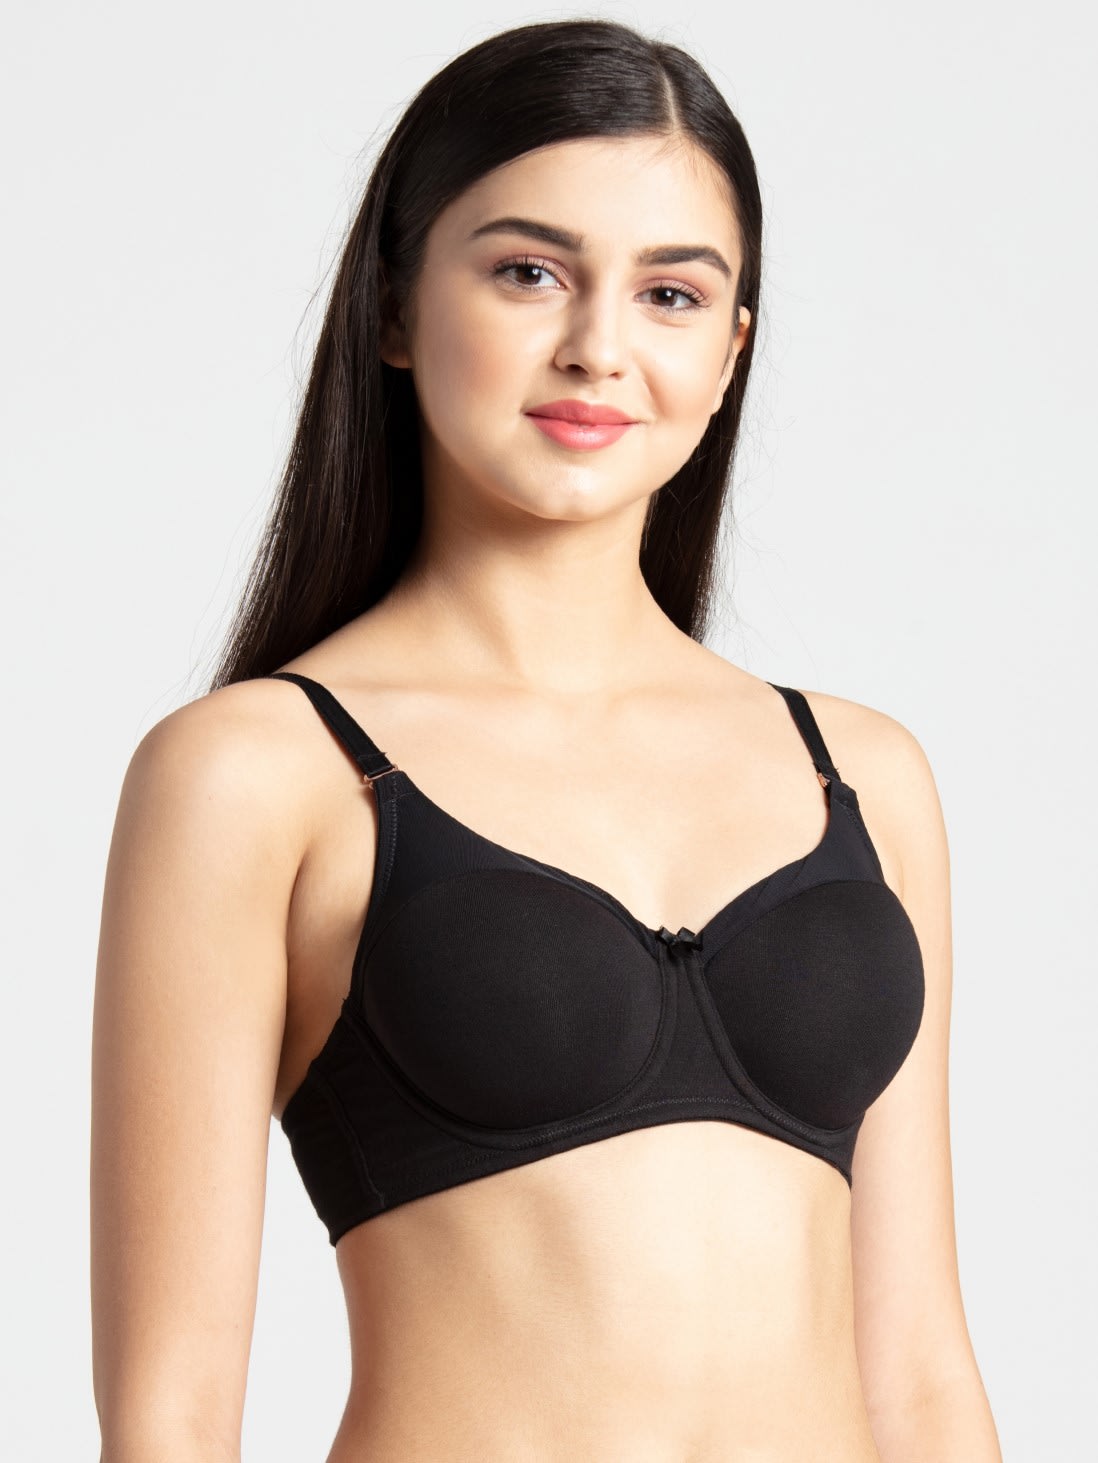 wired bra images